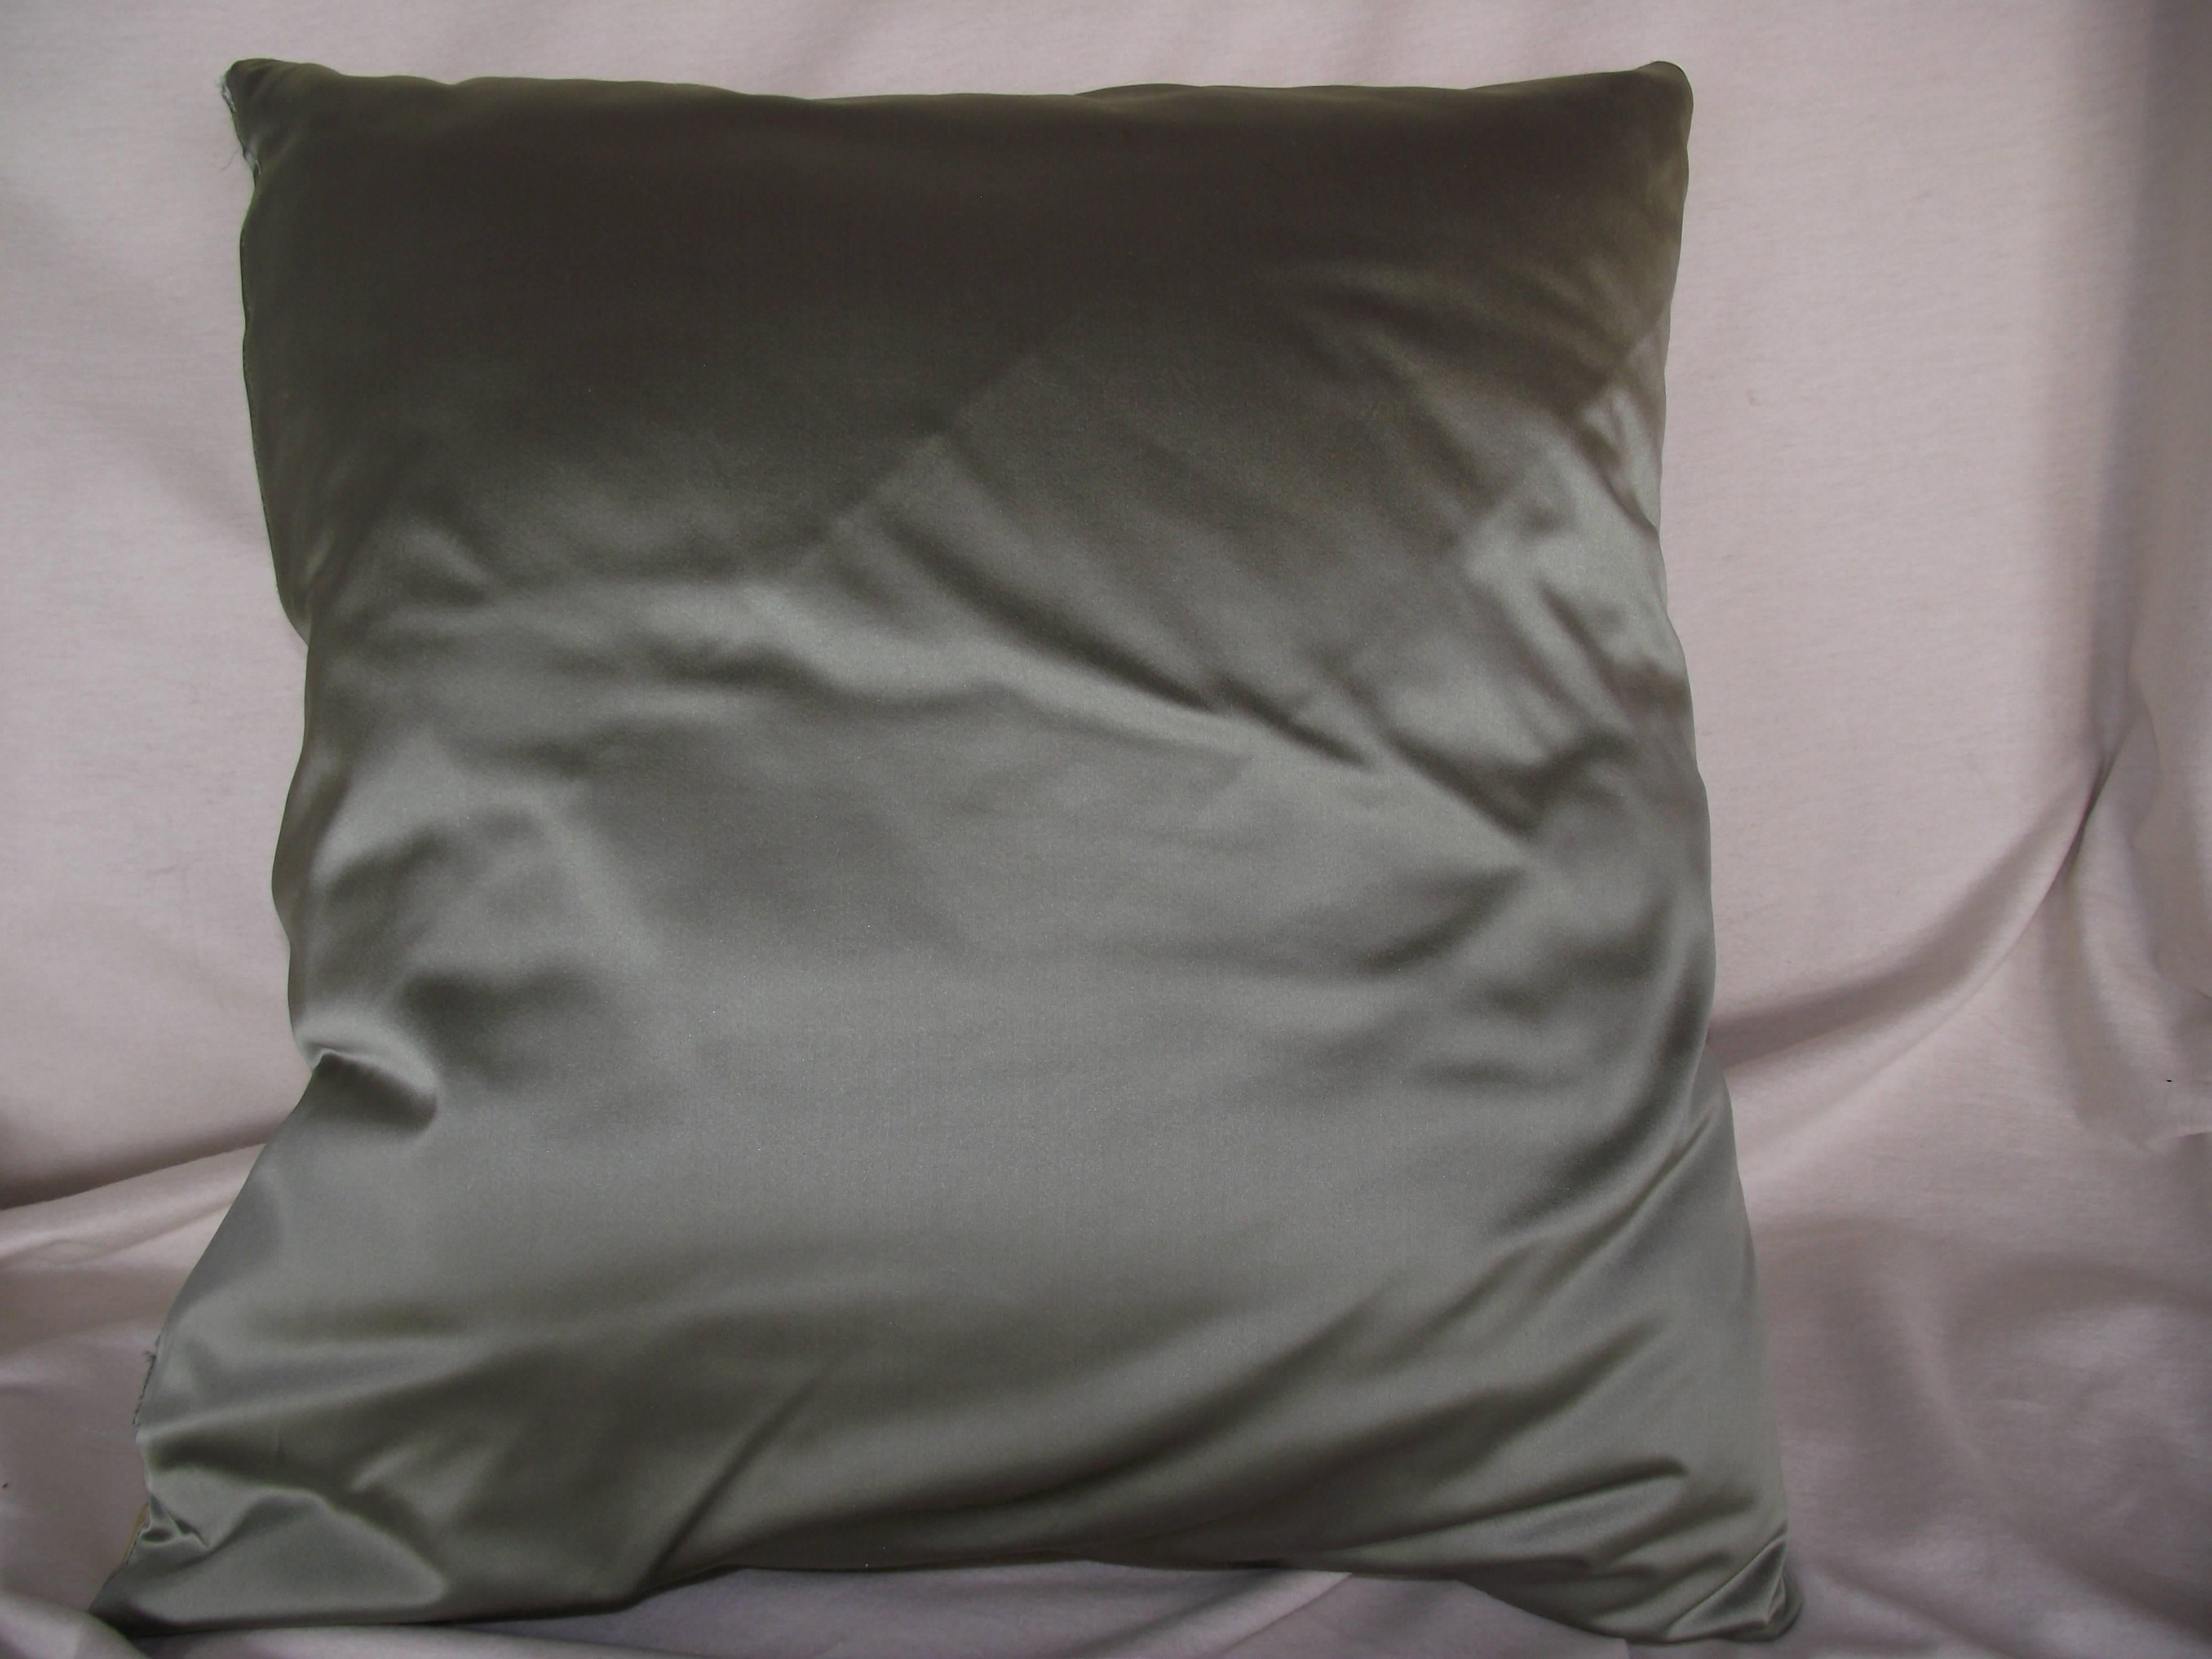 These two thick comfortable pillows are original designs from Gantt Design Studio. The original stripe made of cotton and satin fabrics is mitered and accented with two decorative trims. The back of the pillow is covered in a neutral grey green